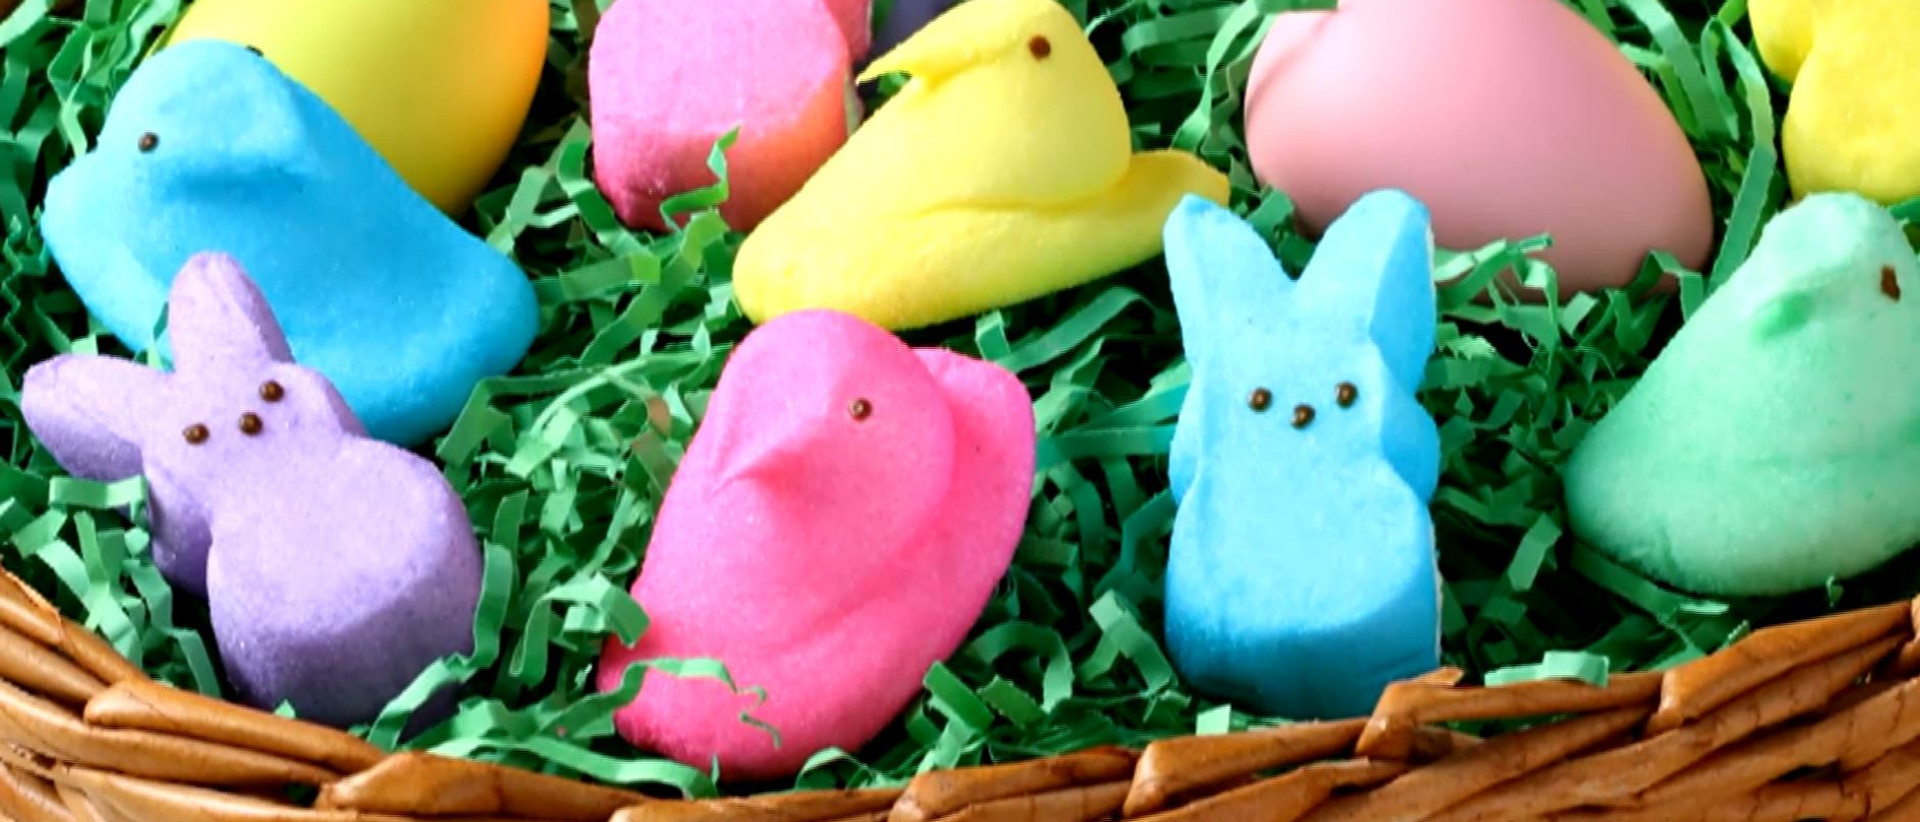 Survey: These are the 3 most preferred Easter treats